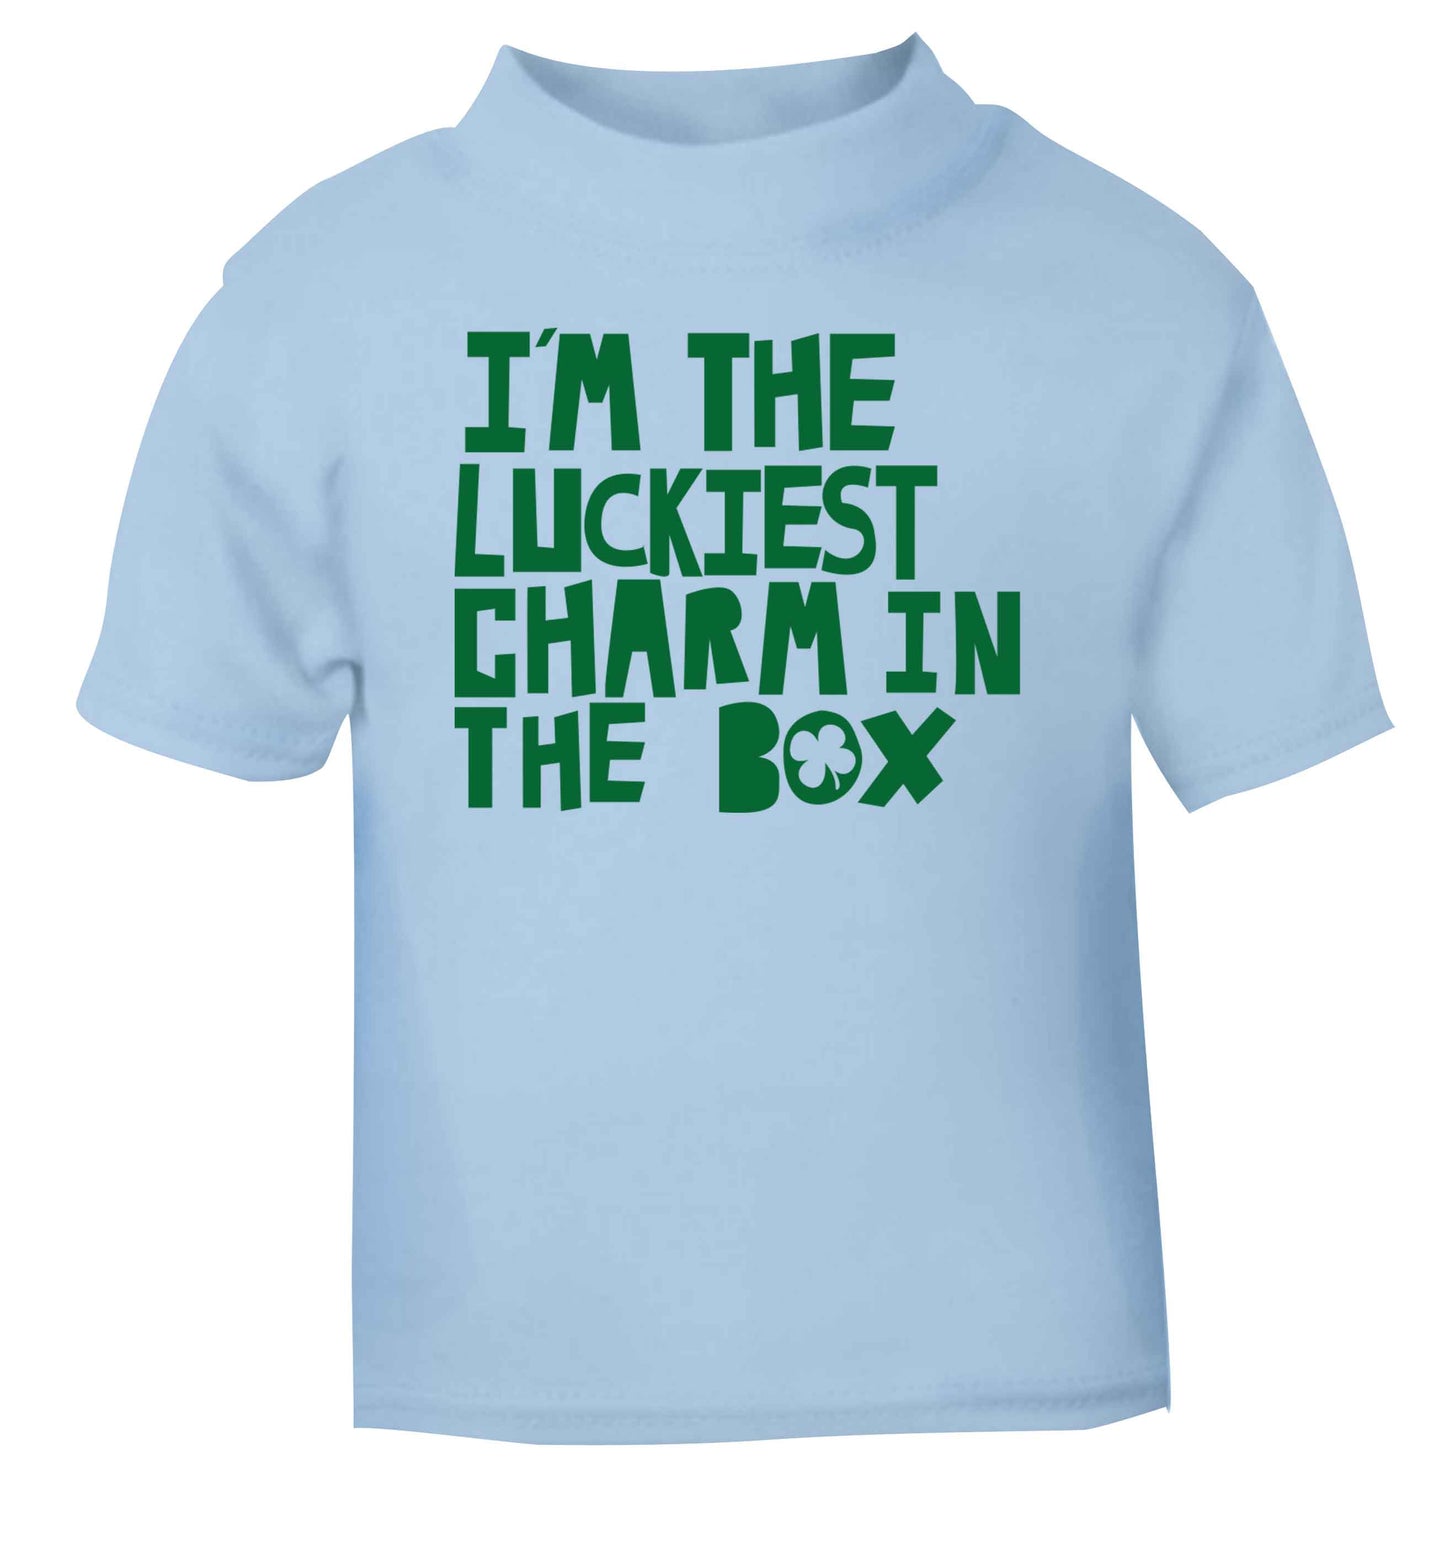 I'm the luckiest charm in the box light blue baby toddler Tshirt 2 Years